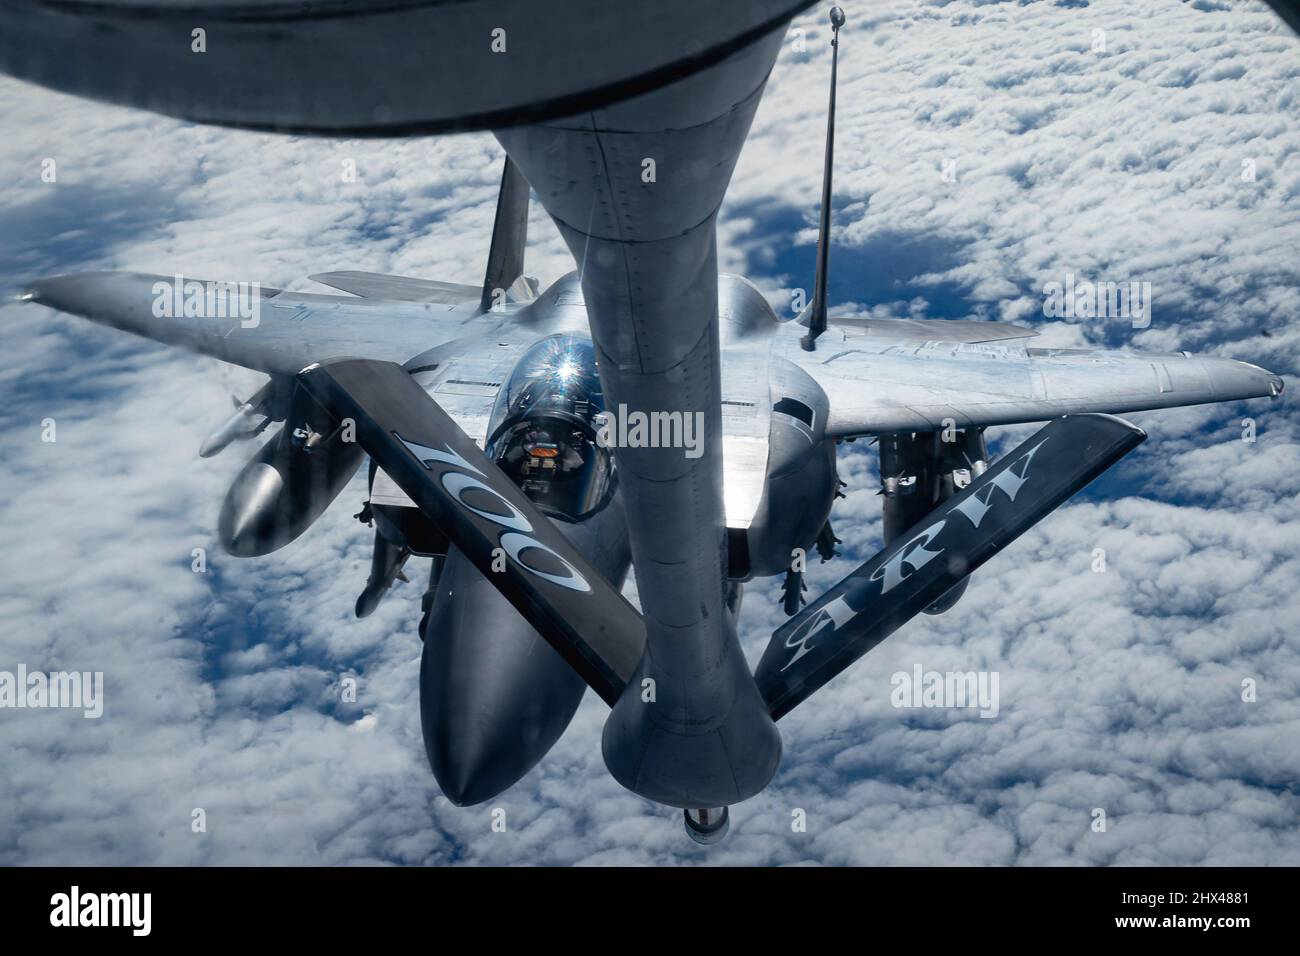 February 26, 2022 - Ramstein Air Base, Rheinland-Pfalz, Germany - A U.S. Air Force Boeing KC-135 Stratotanker provides fuel to an F15E Strike Eagle over Eastern Europe, Feb. 26, 2022. The 100th Aerial Refueling Wing assigned to Royal Air Force Mildenhall is currently operating missions out of Ramstein Air Base, Germany, providing 24-hour support to NATO allies and partners. Credit: U.S. Air Force/ZUMA Press Wire Service/ZUMAPRESS.com/Alamy Live News Stock Photo